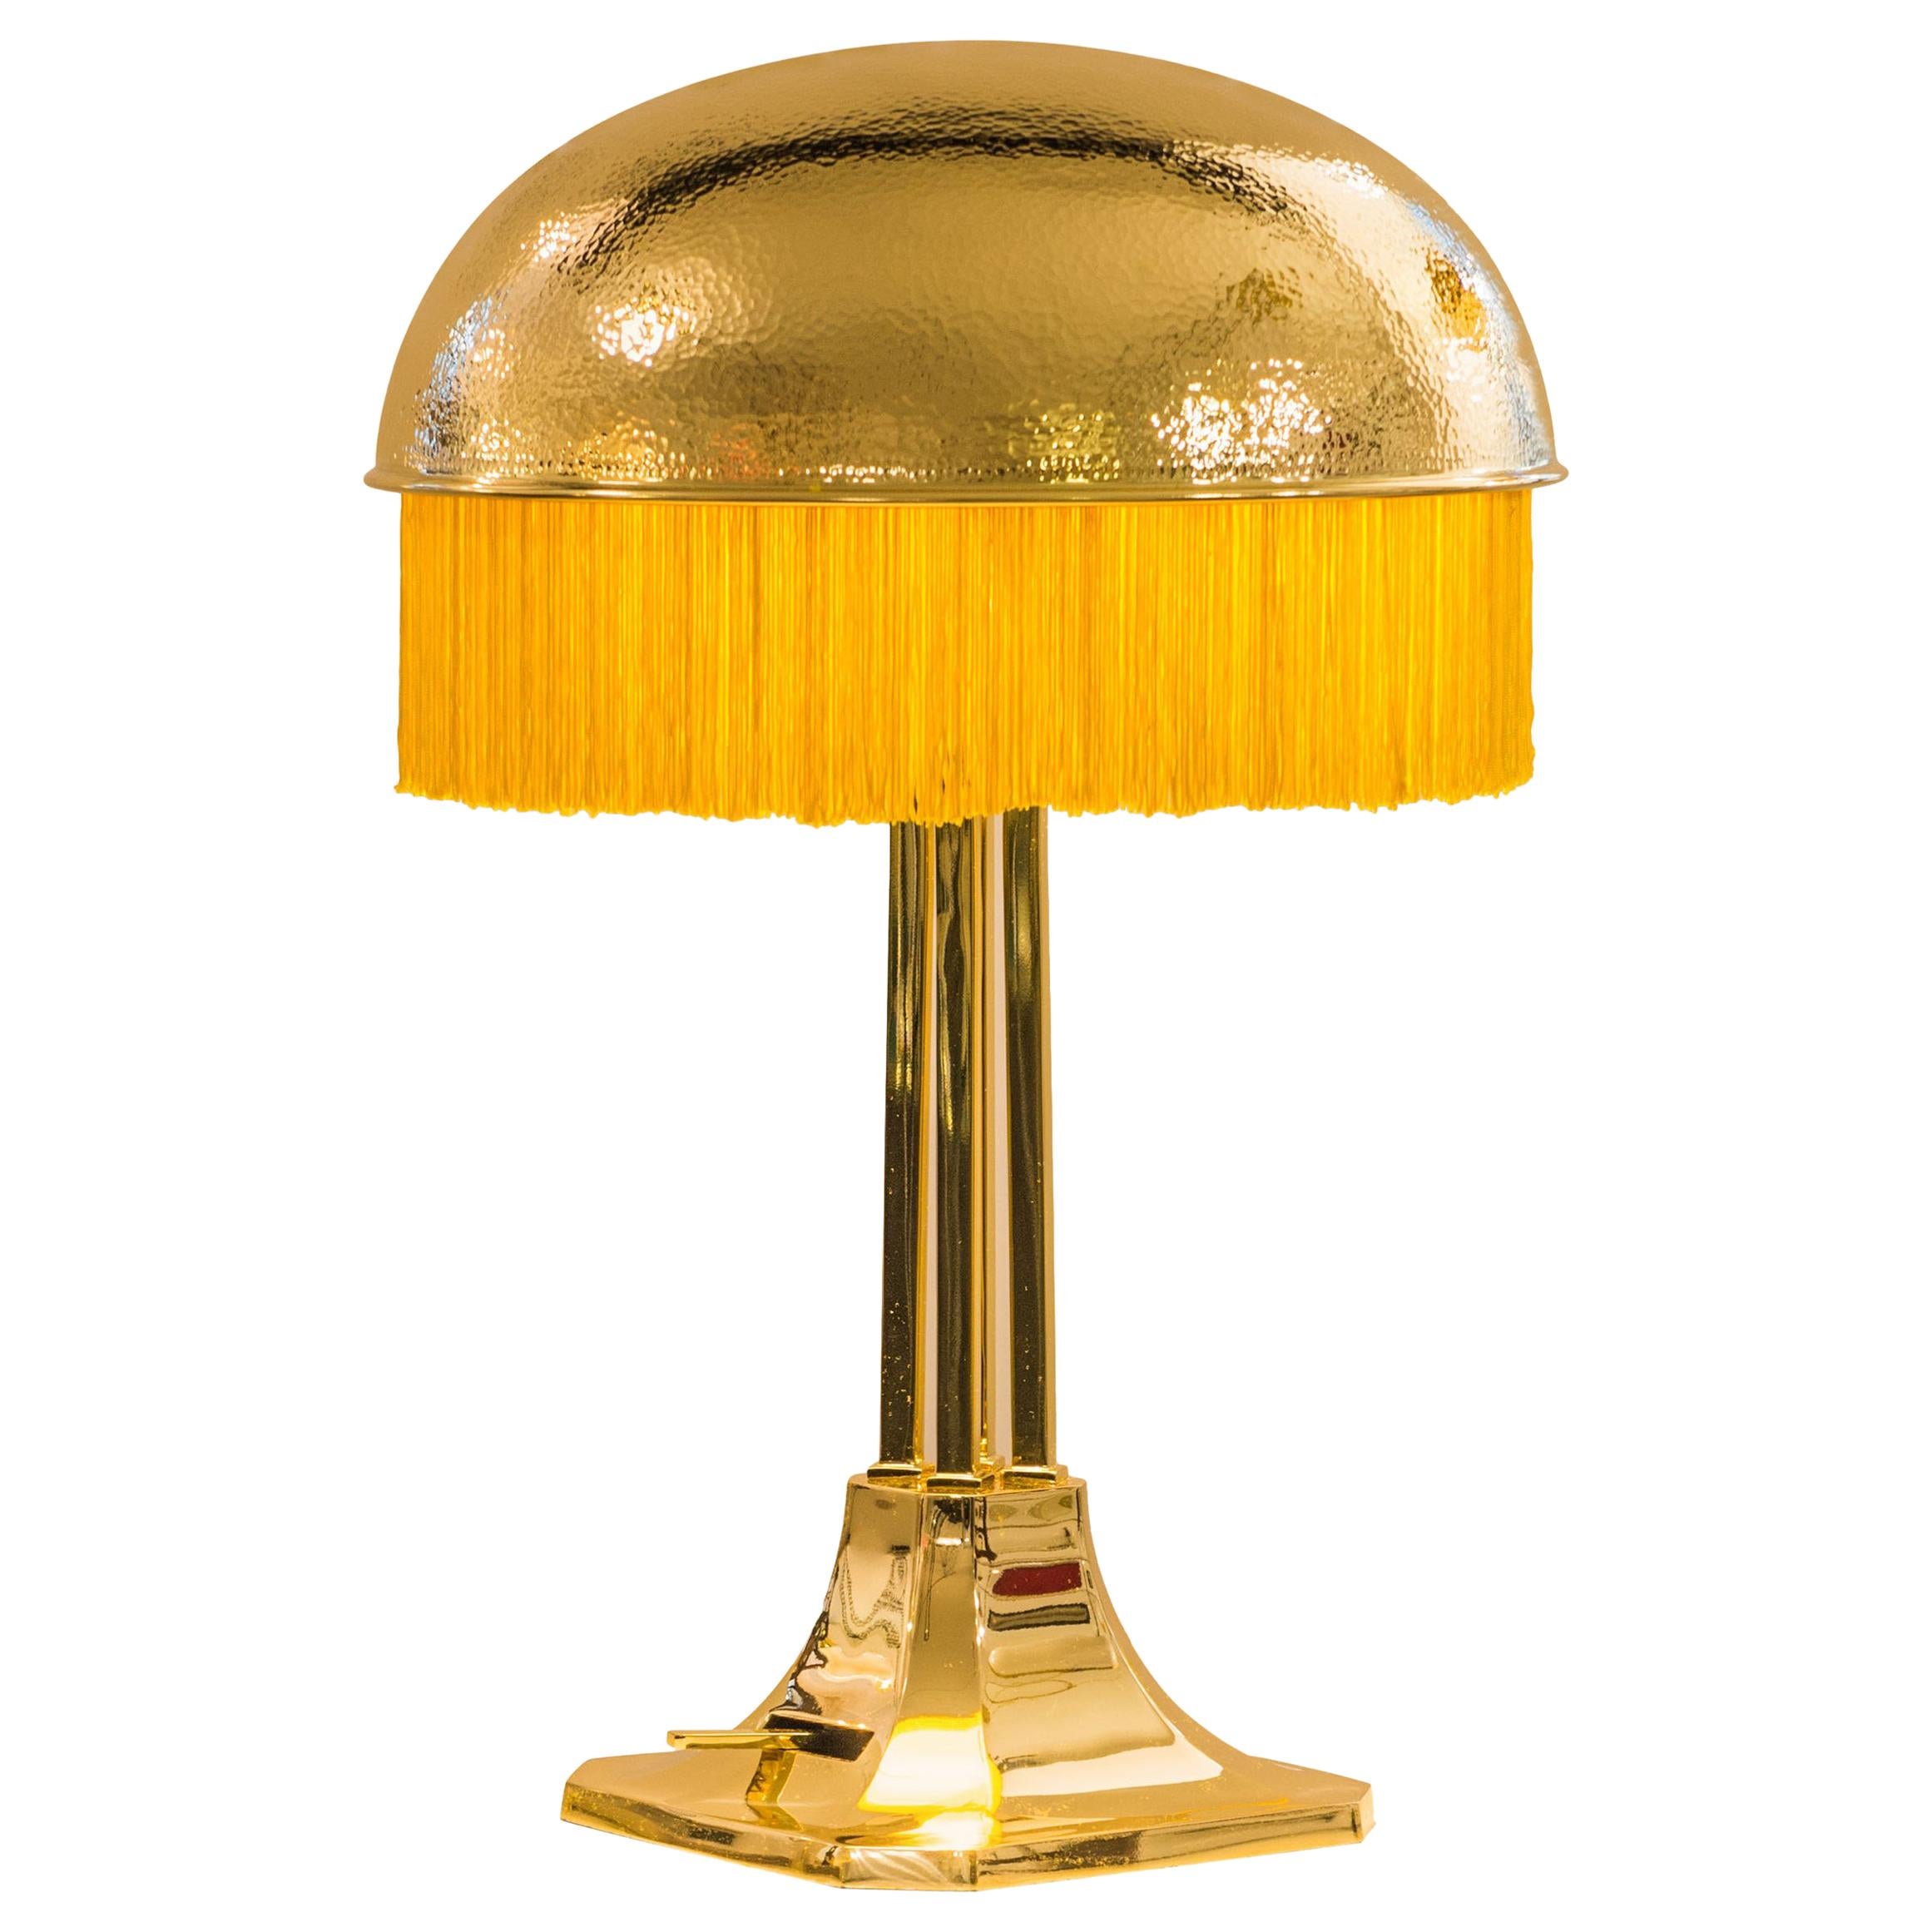 Famous Adolf Loos "Turnowsky" Table Lamp Brass Silk Design from 1900, Re-Edition